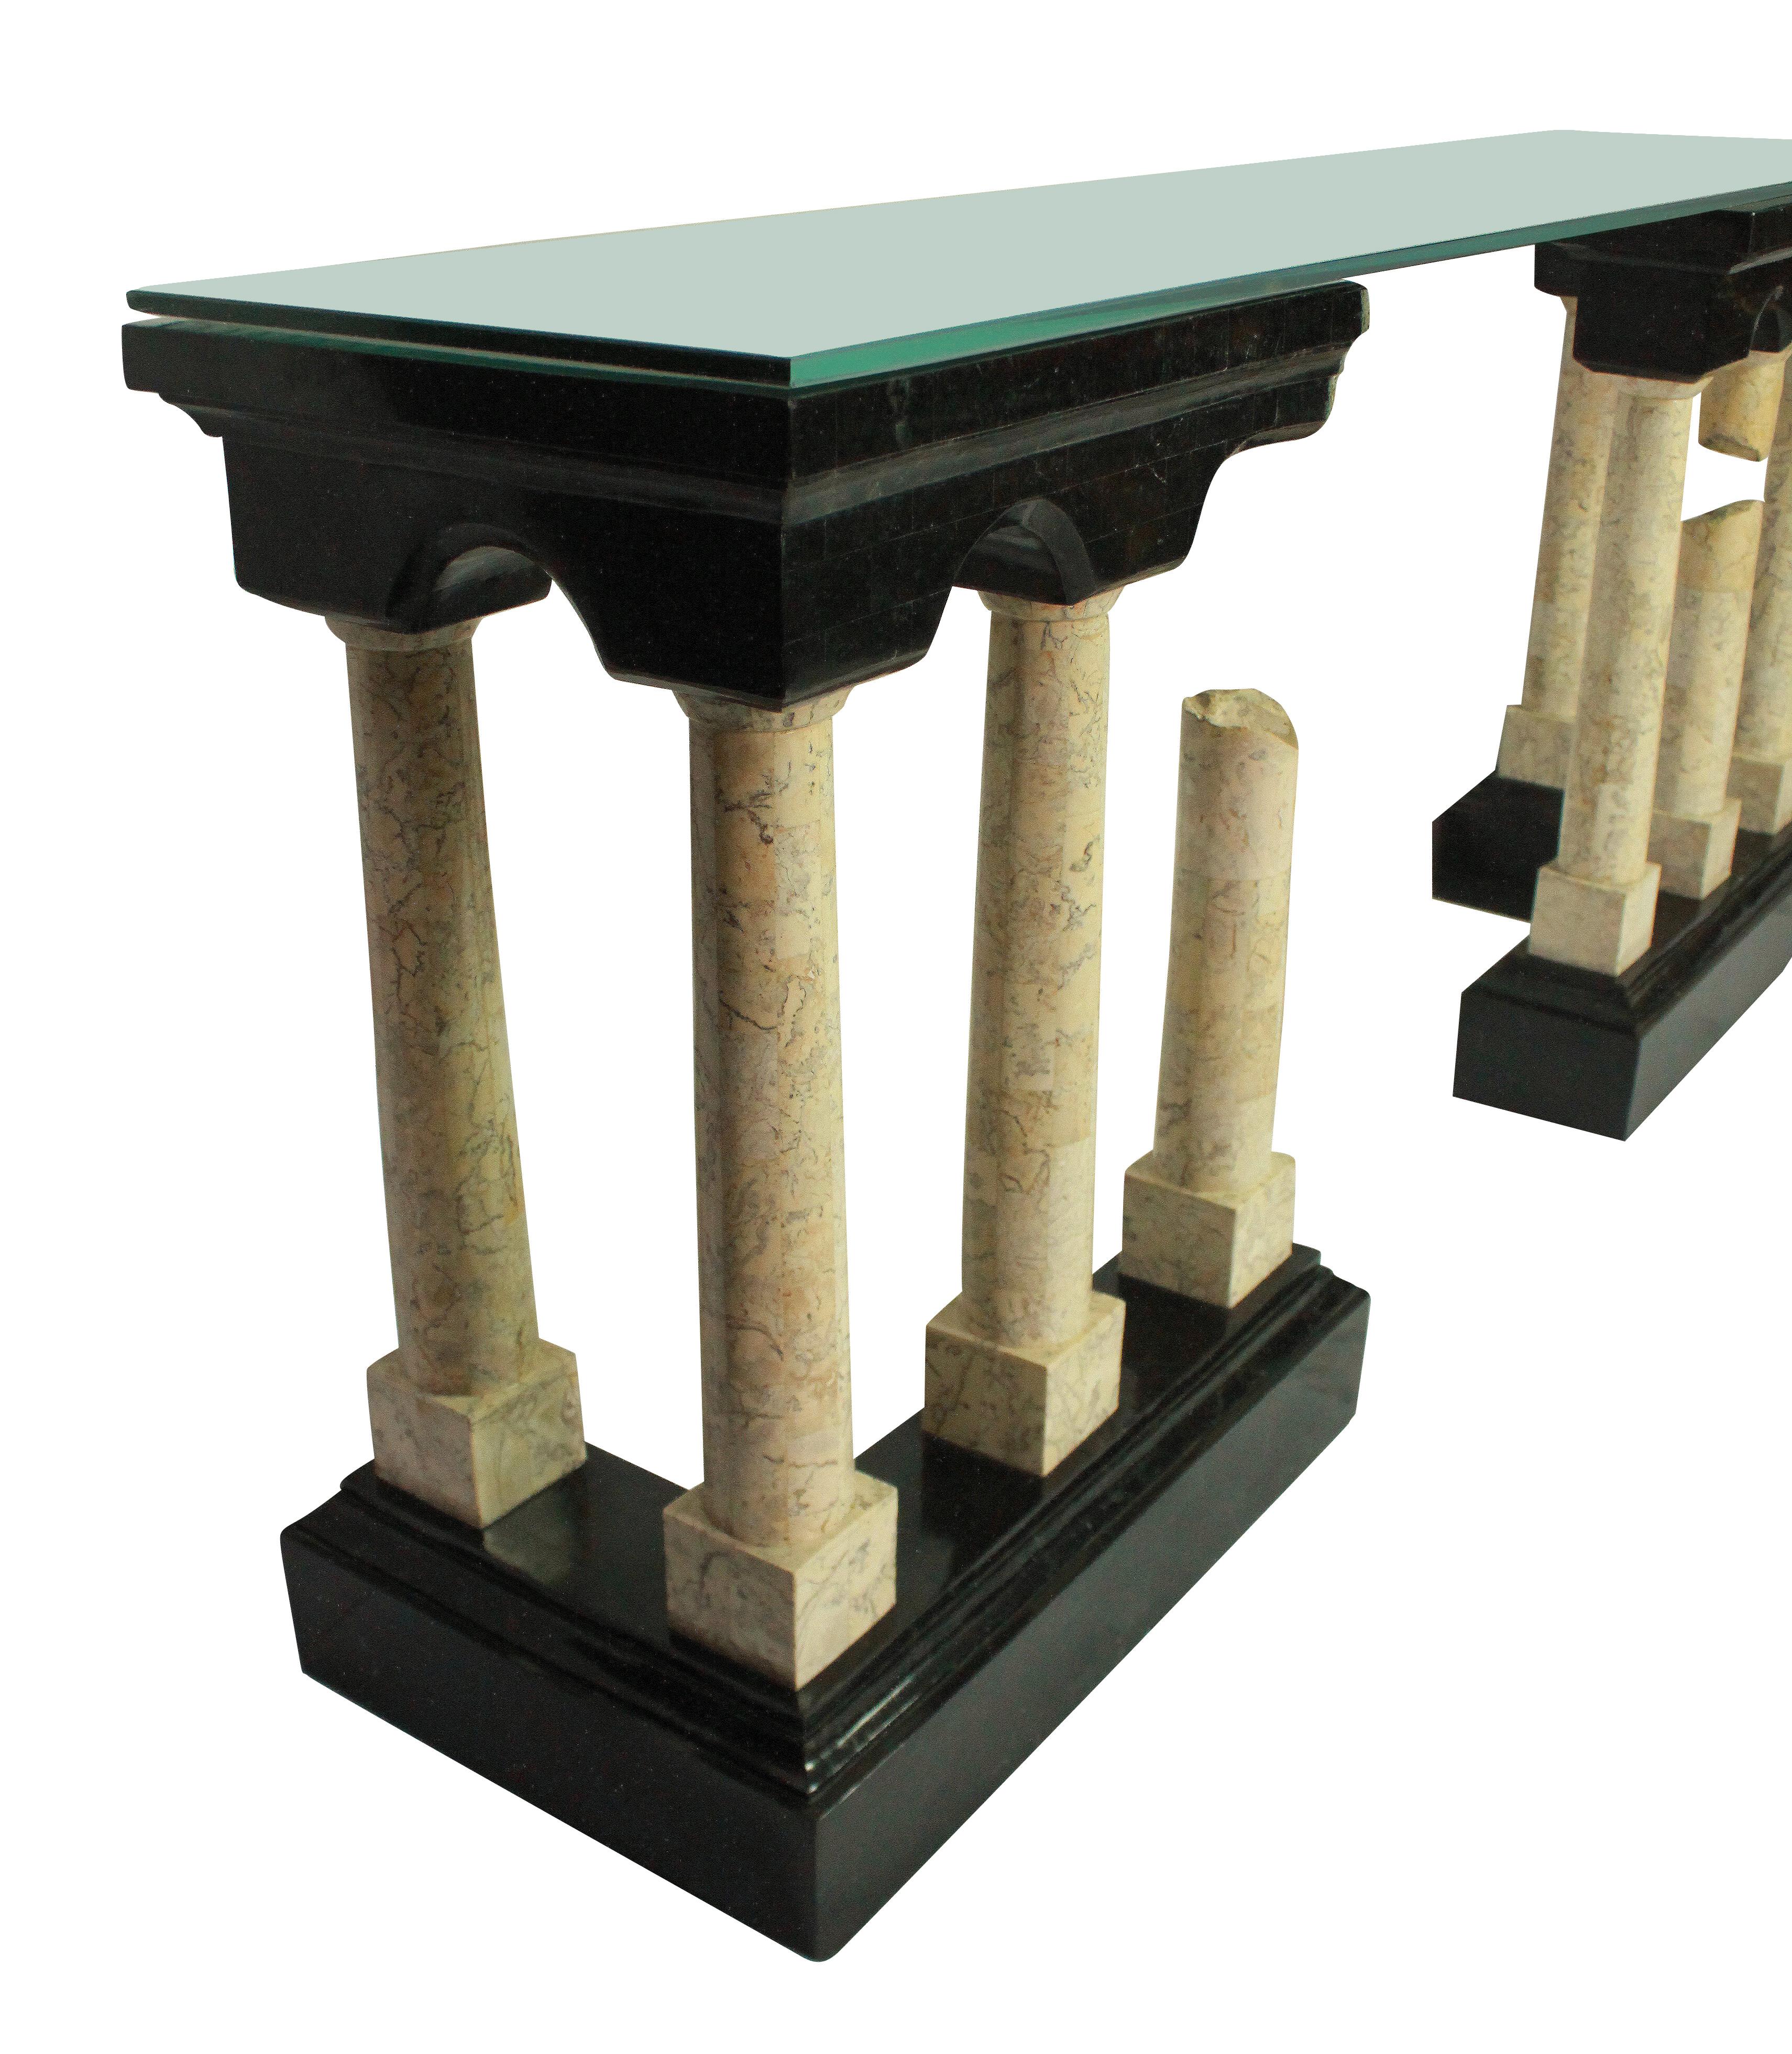 An exceptional Italian console table depicting ancient Roman ruins in polished marble veneers. The base and pediment in a very dark green, with ivory colored pillars. With a plate glass top.